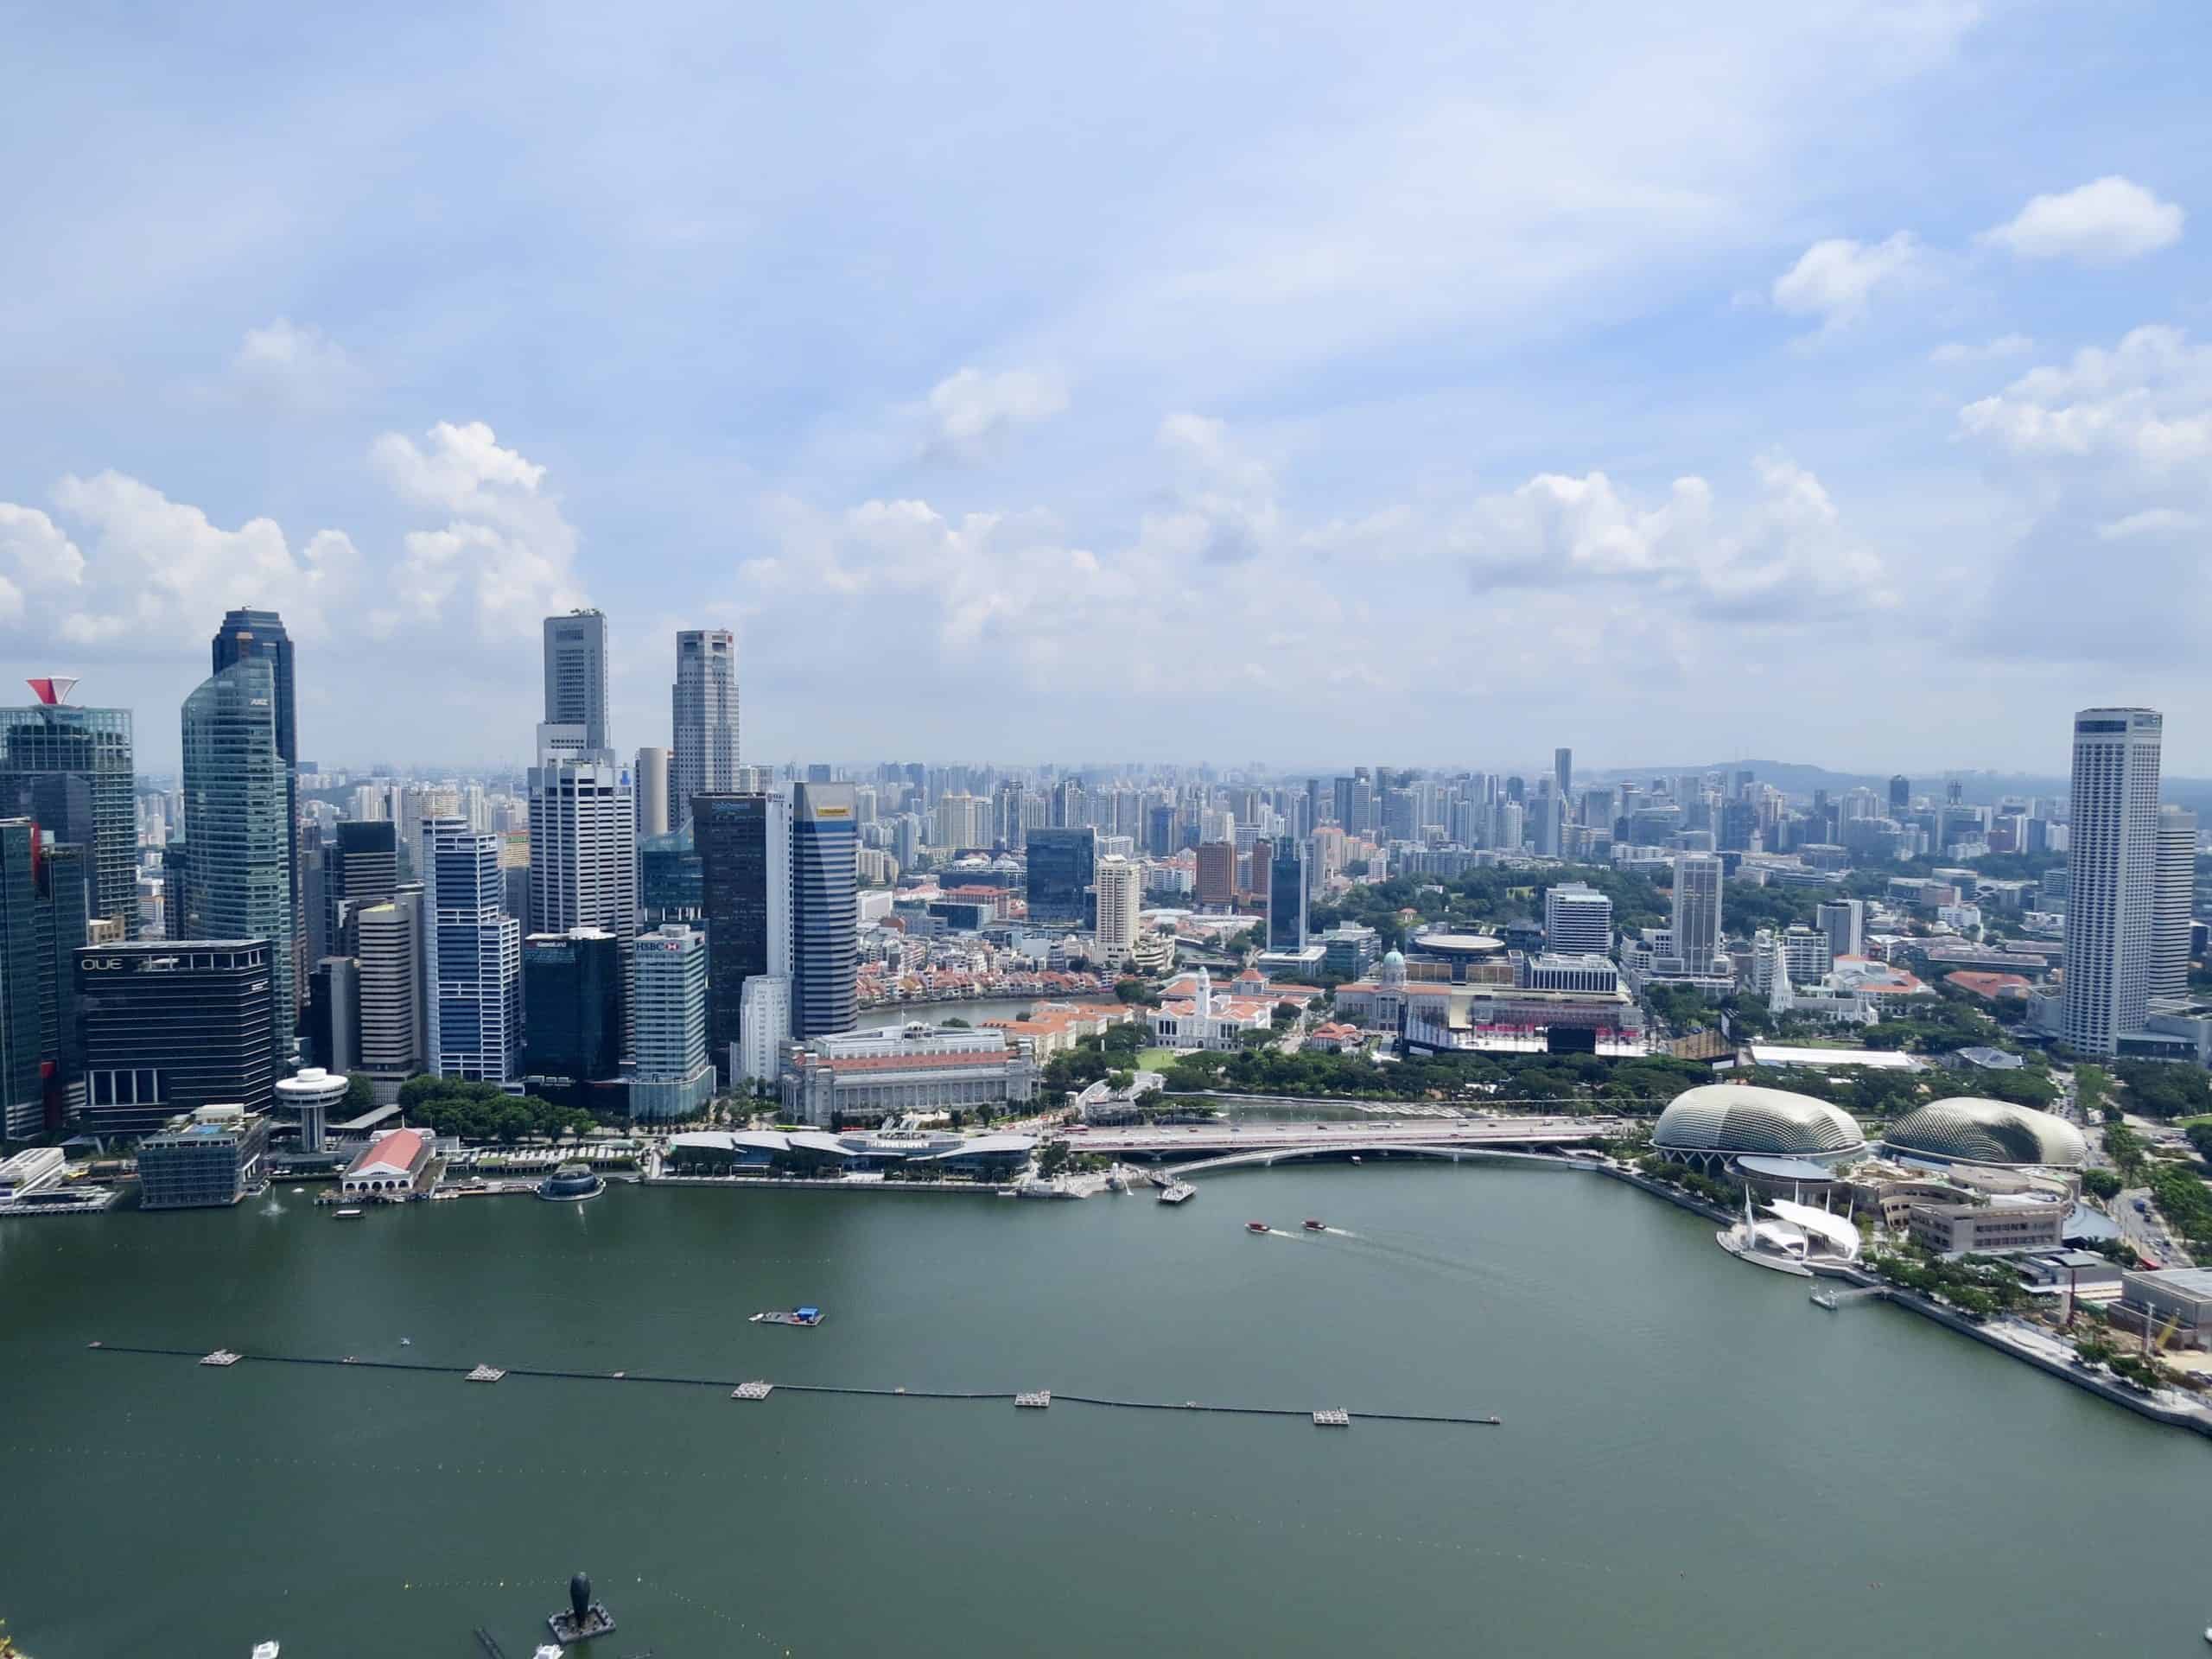 Singapore skyline from the observation deck of Marina Bay Sands SkyPark